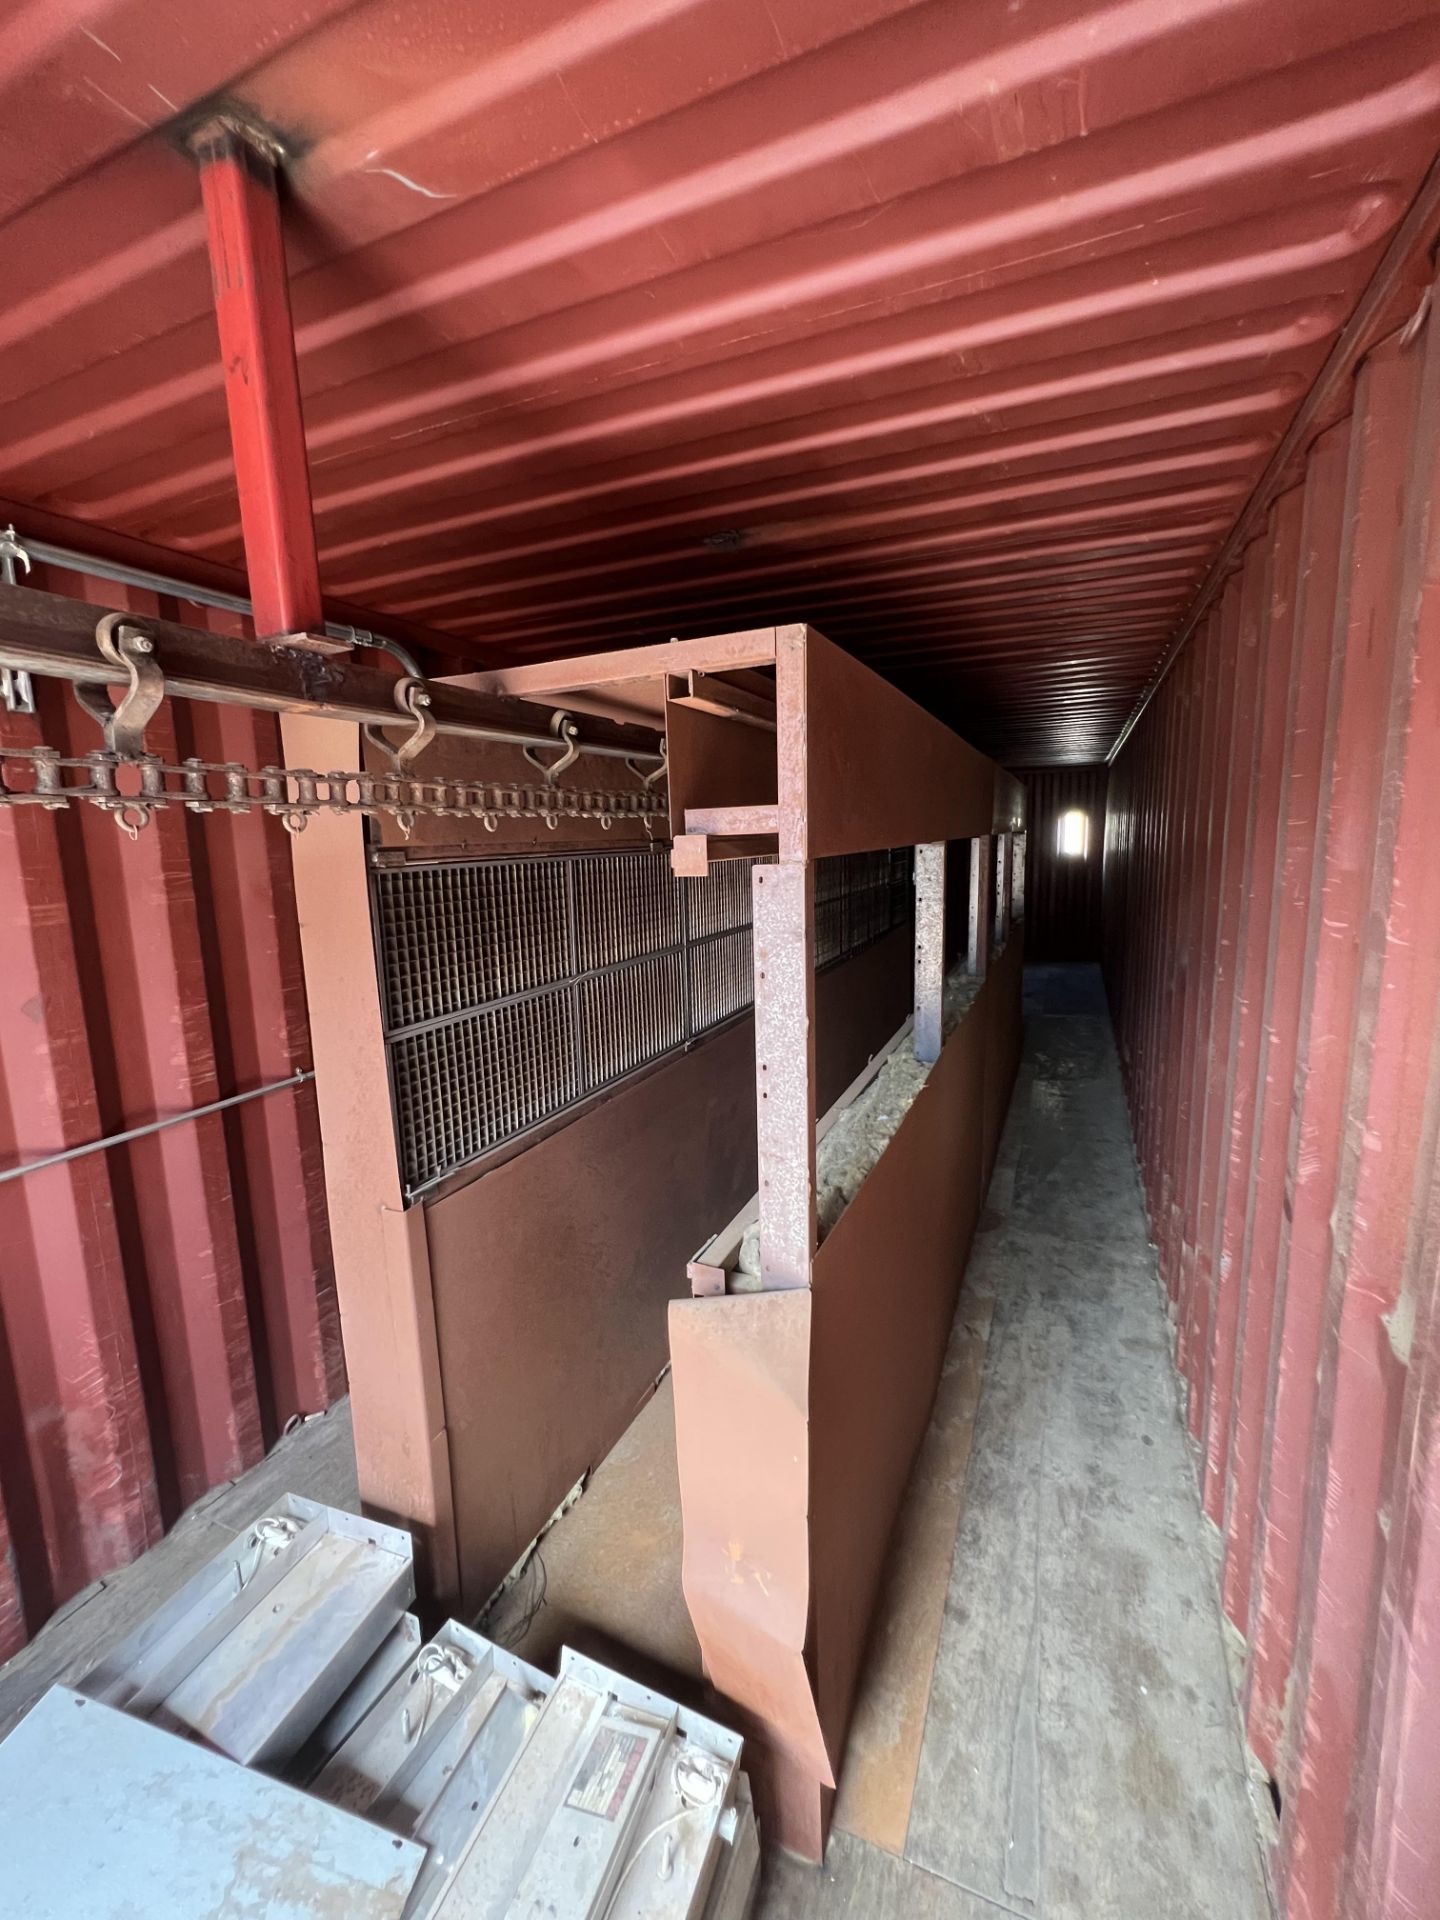 POWDER COAT CONVEYOR CONTAINED IN 2-40' CONEX BOXES - Image 7 of 9